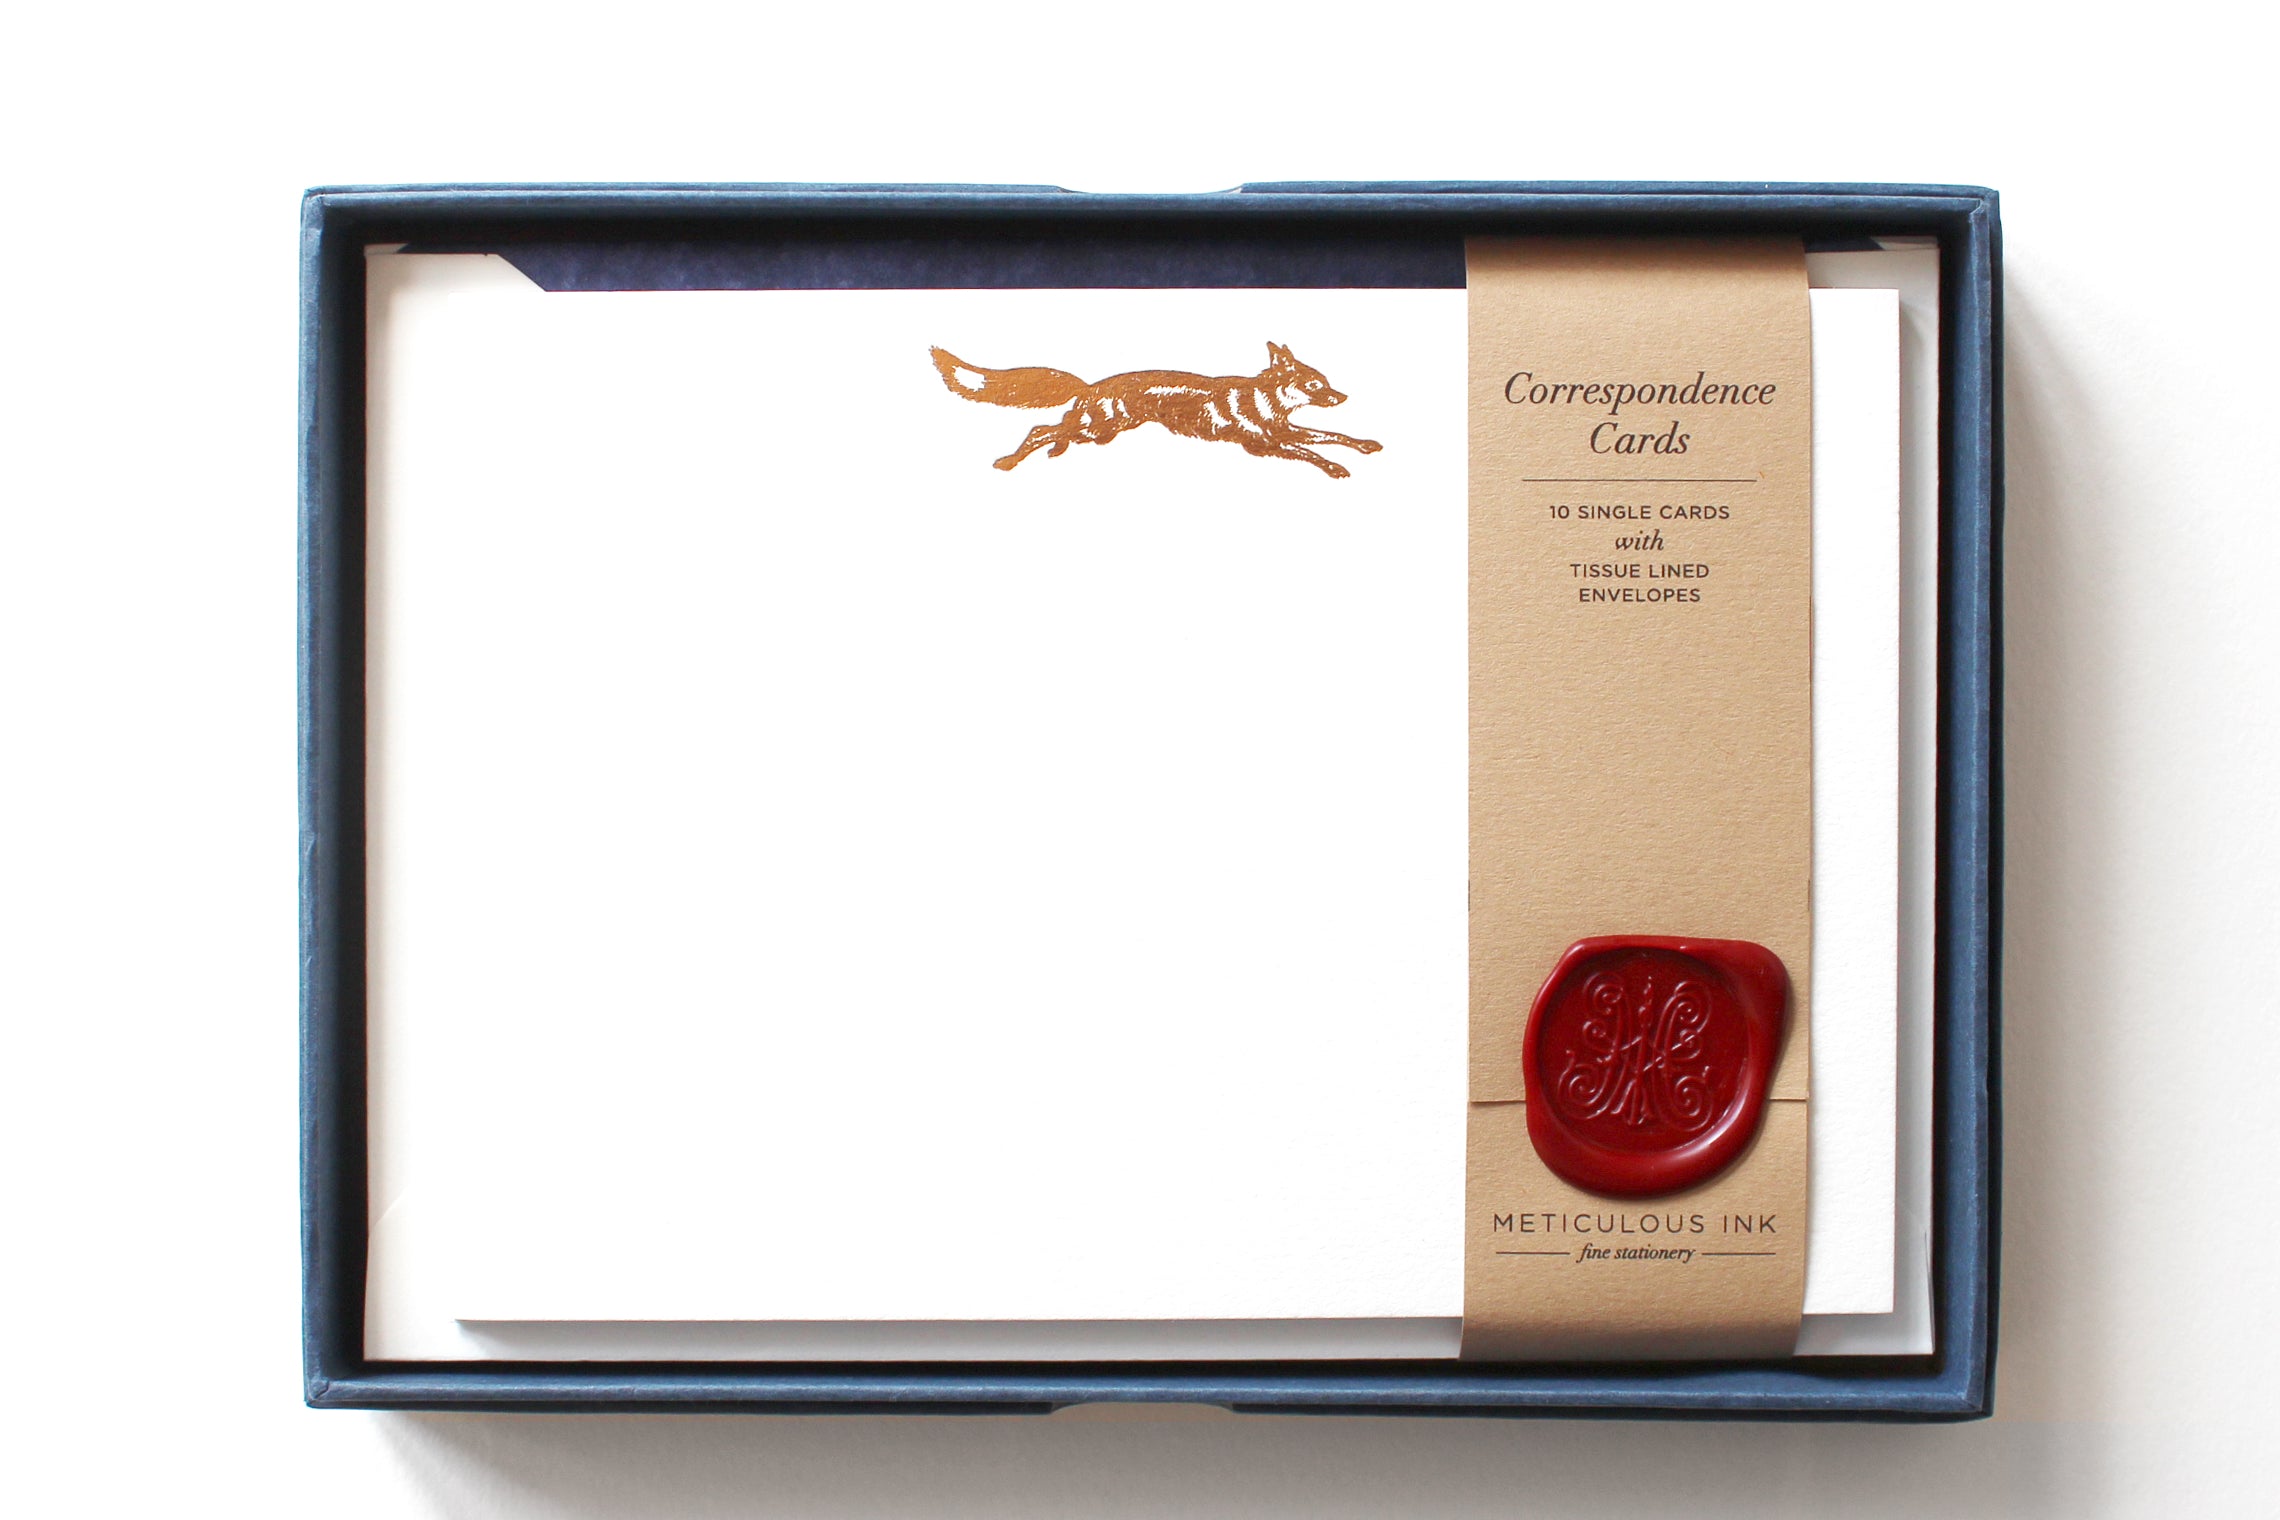 Copper Foil Fox Correspondence Cards in display box with wax seal